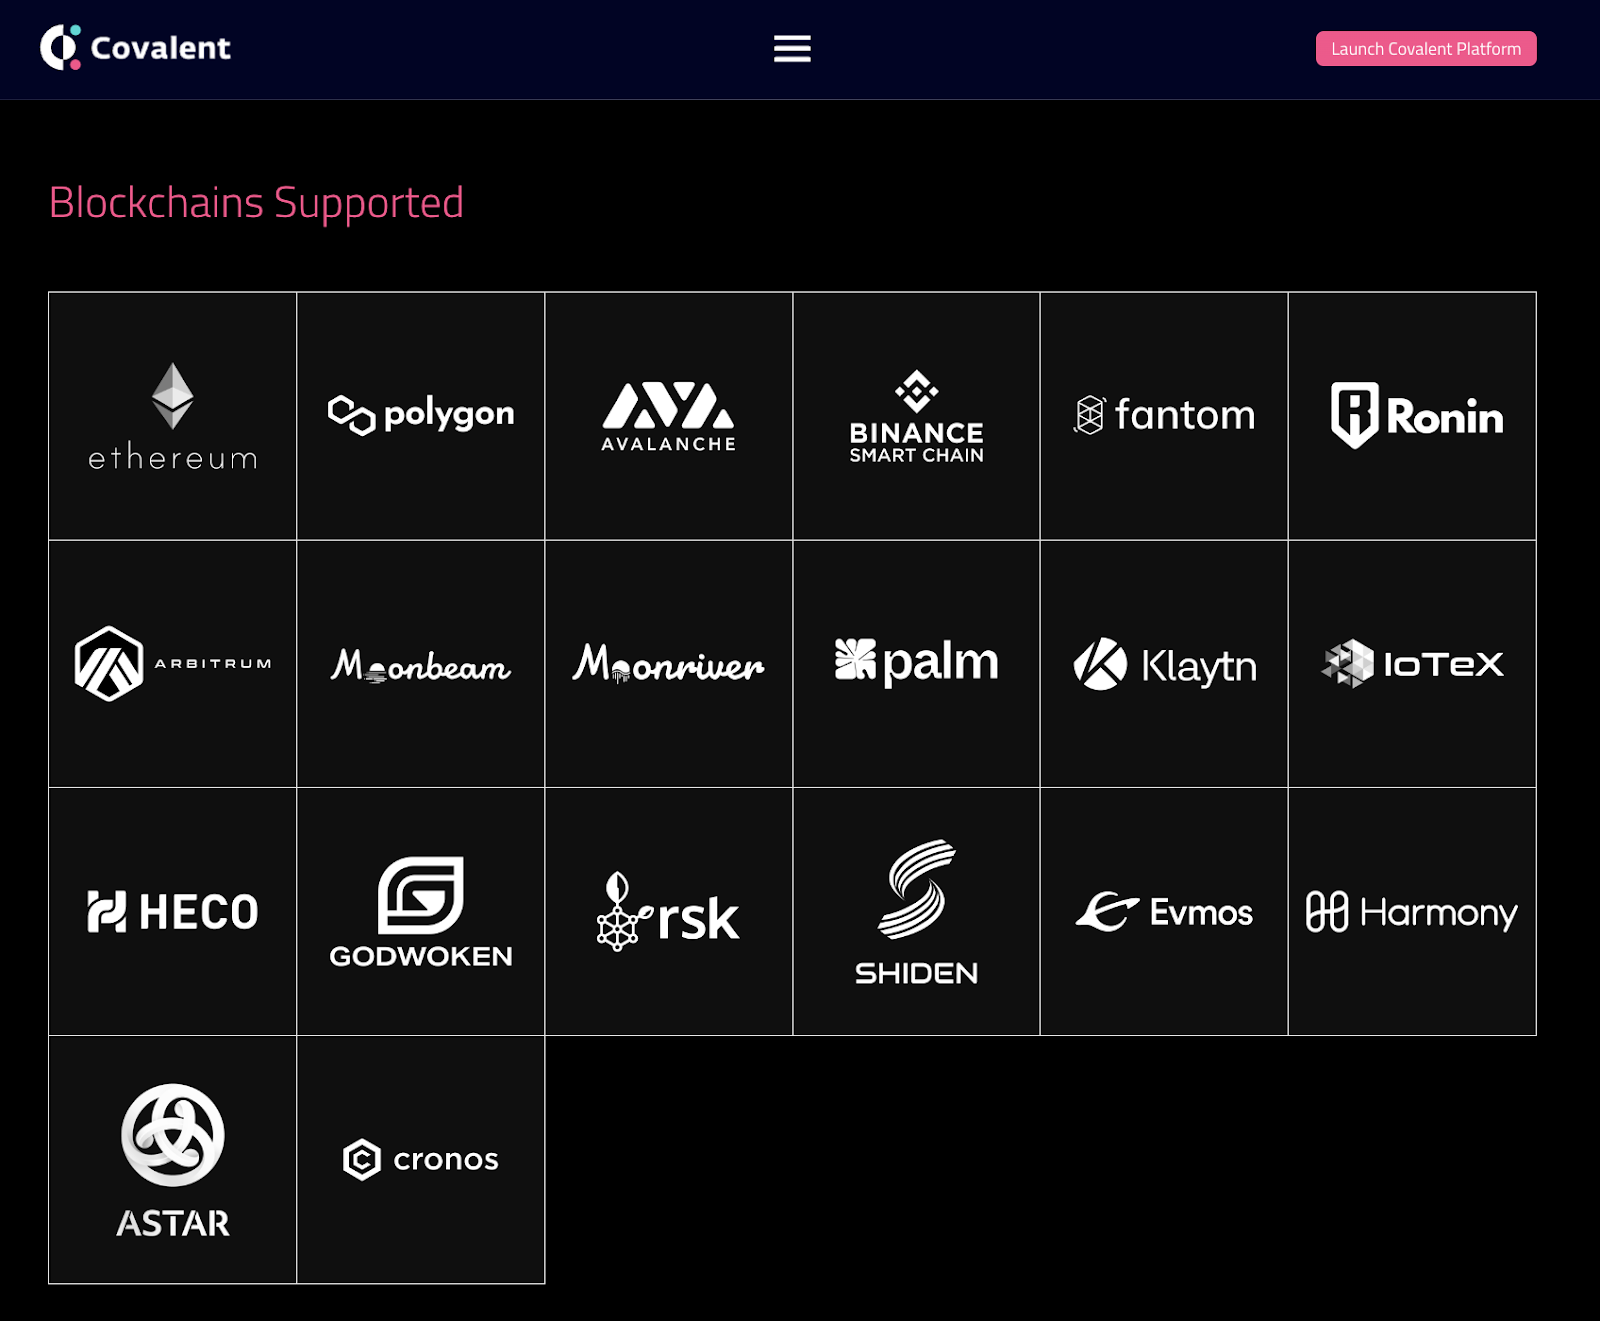 A list of blockchains supported by Covalent, including Ethereum, Polygon, Avalanche, Binance, etc.